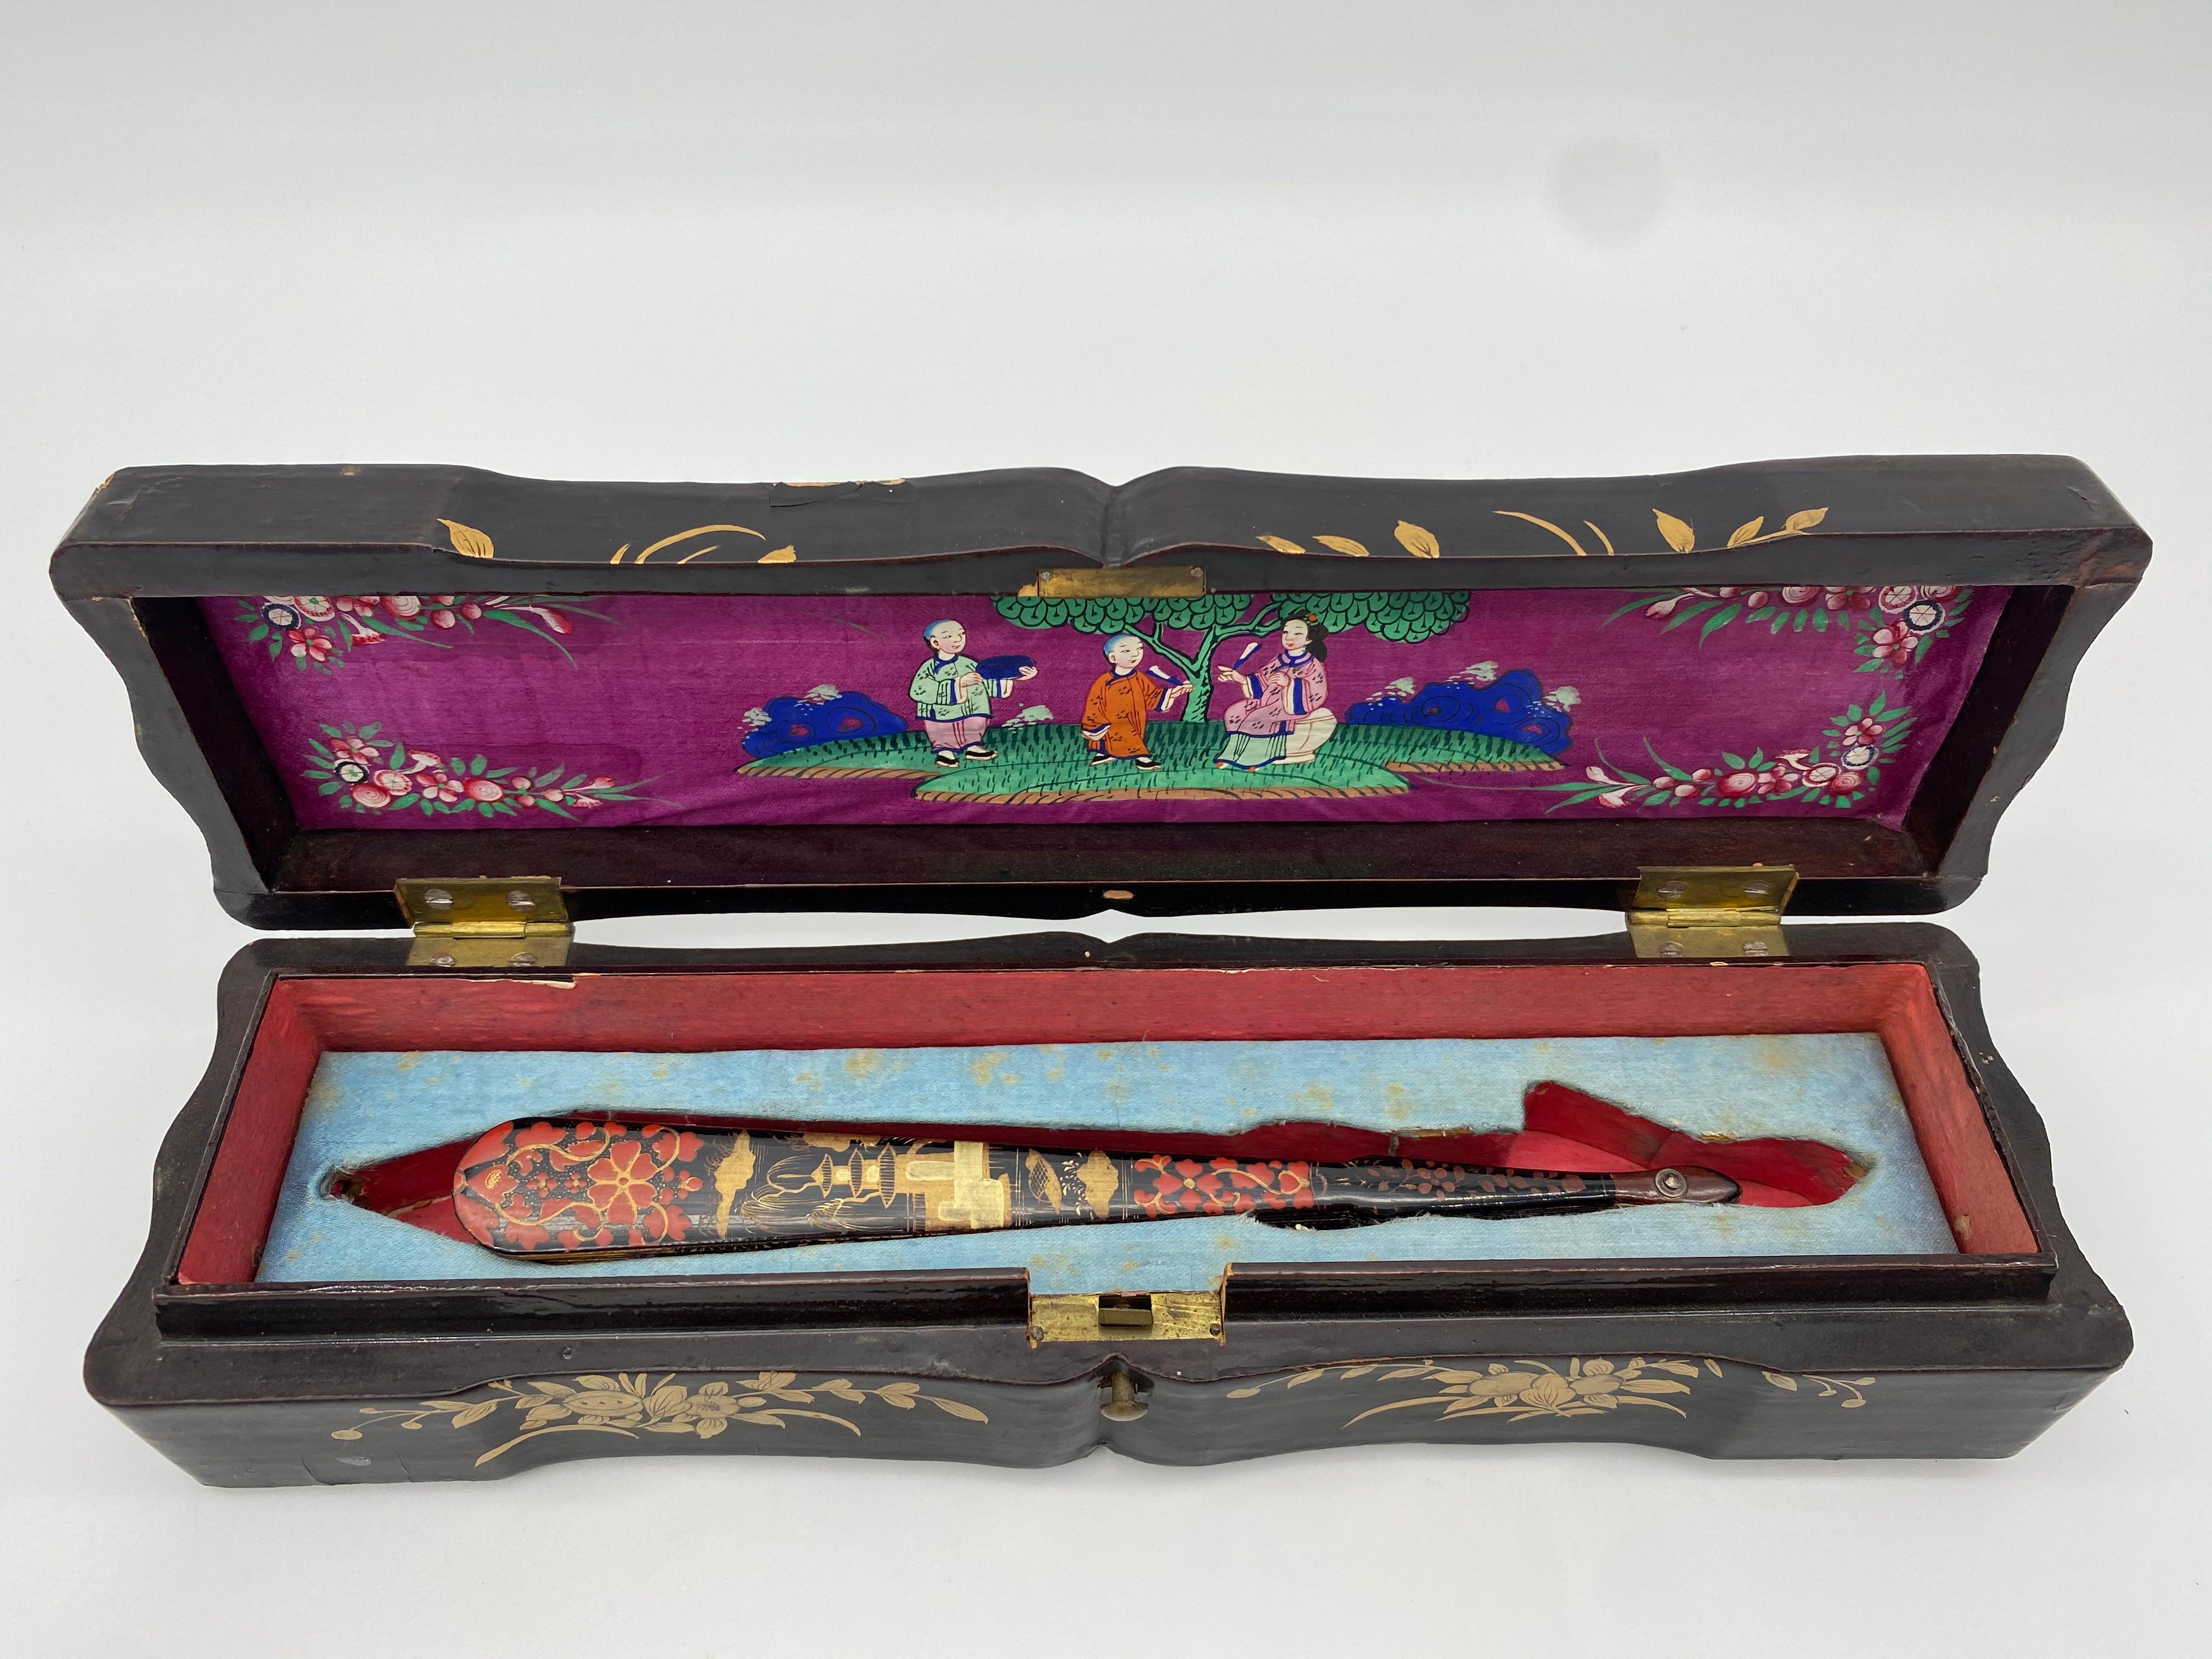 19th century antique Chinese hand painted lacquer scene gilt fan with original lacquer box.